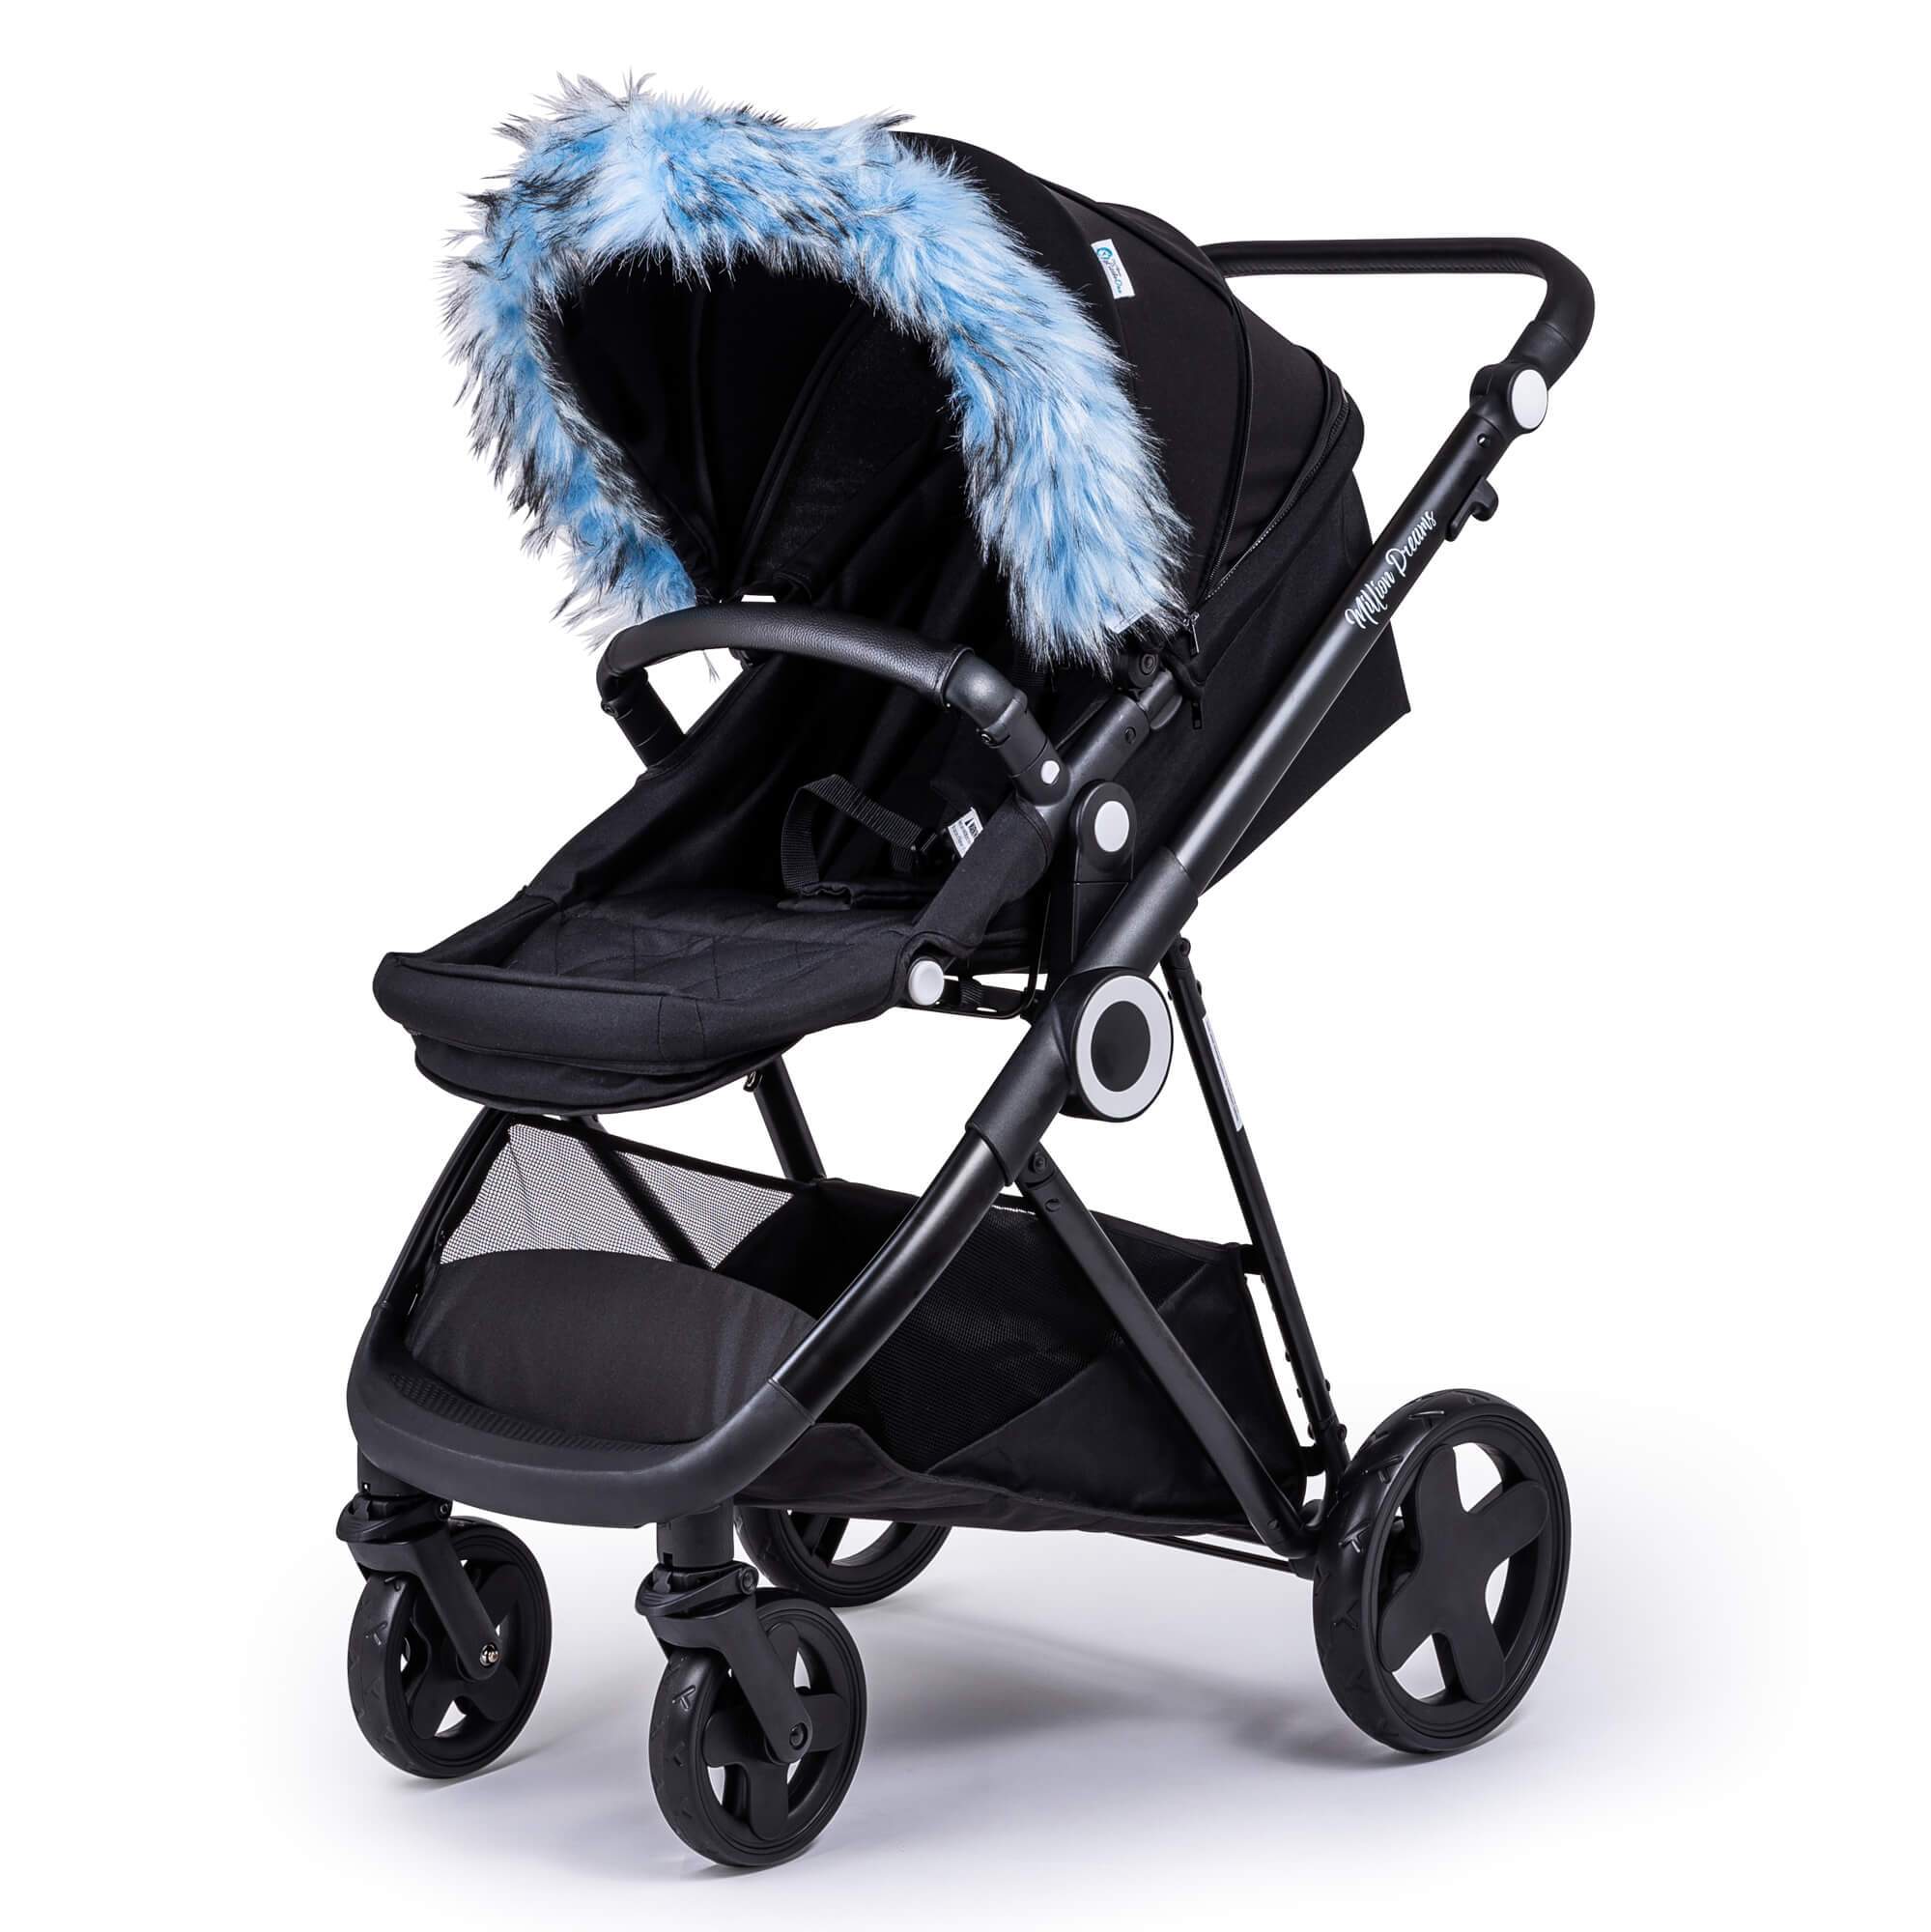 Pram Fur Hood Trim Attachment for Pushchair Compatible with Babylo - Light Blue / Fits All Models | For Your Little One